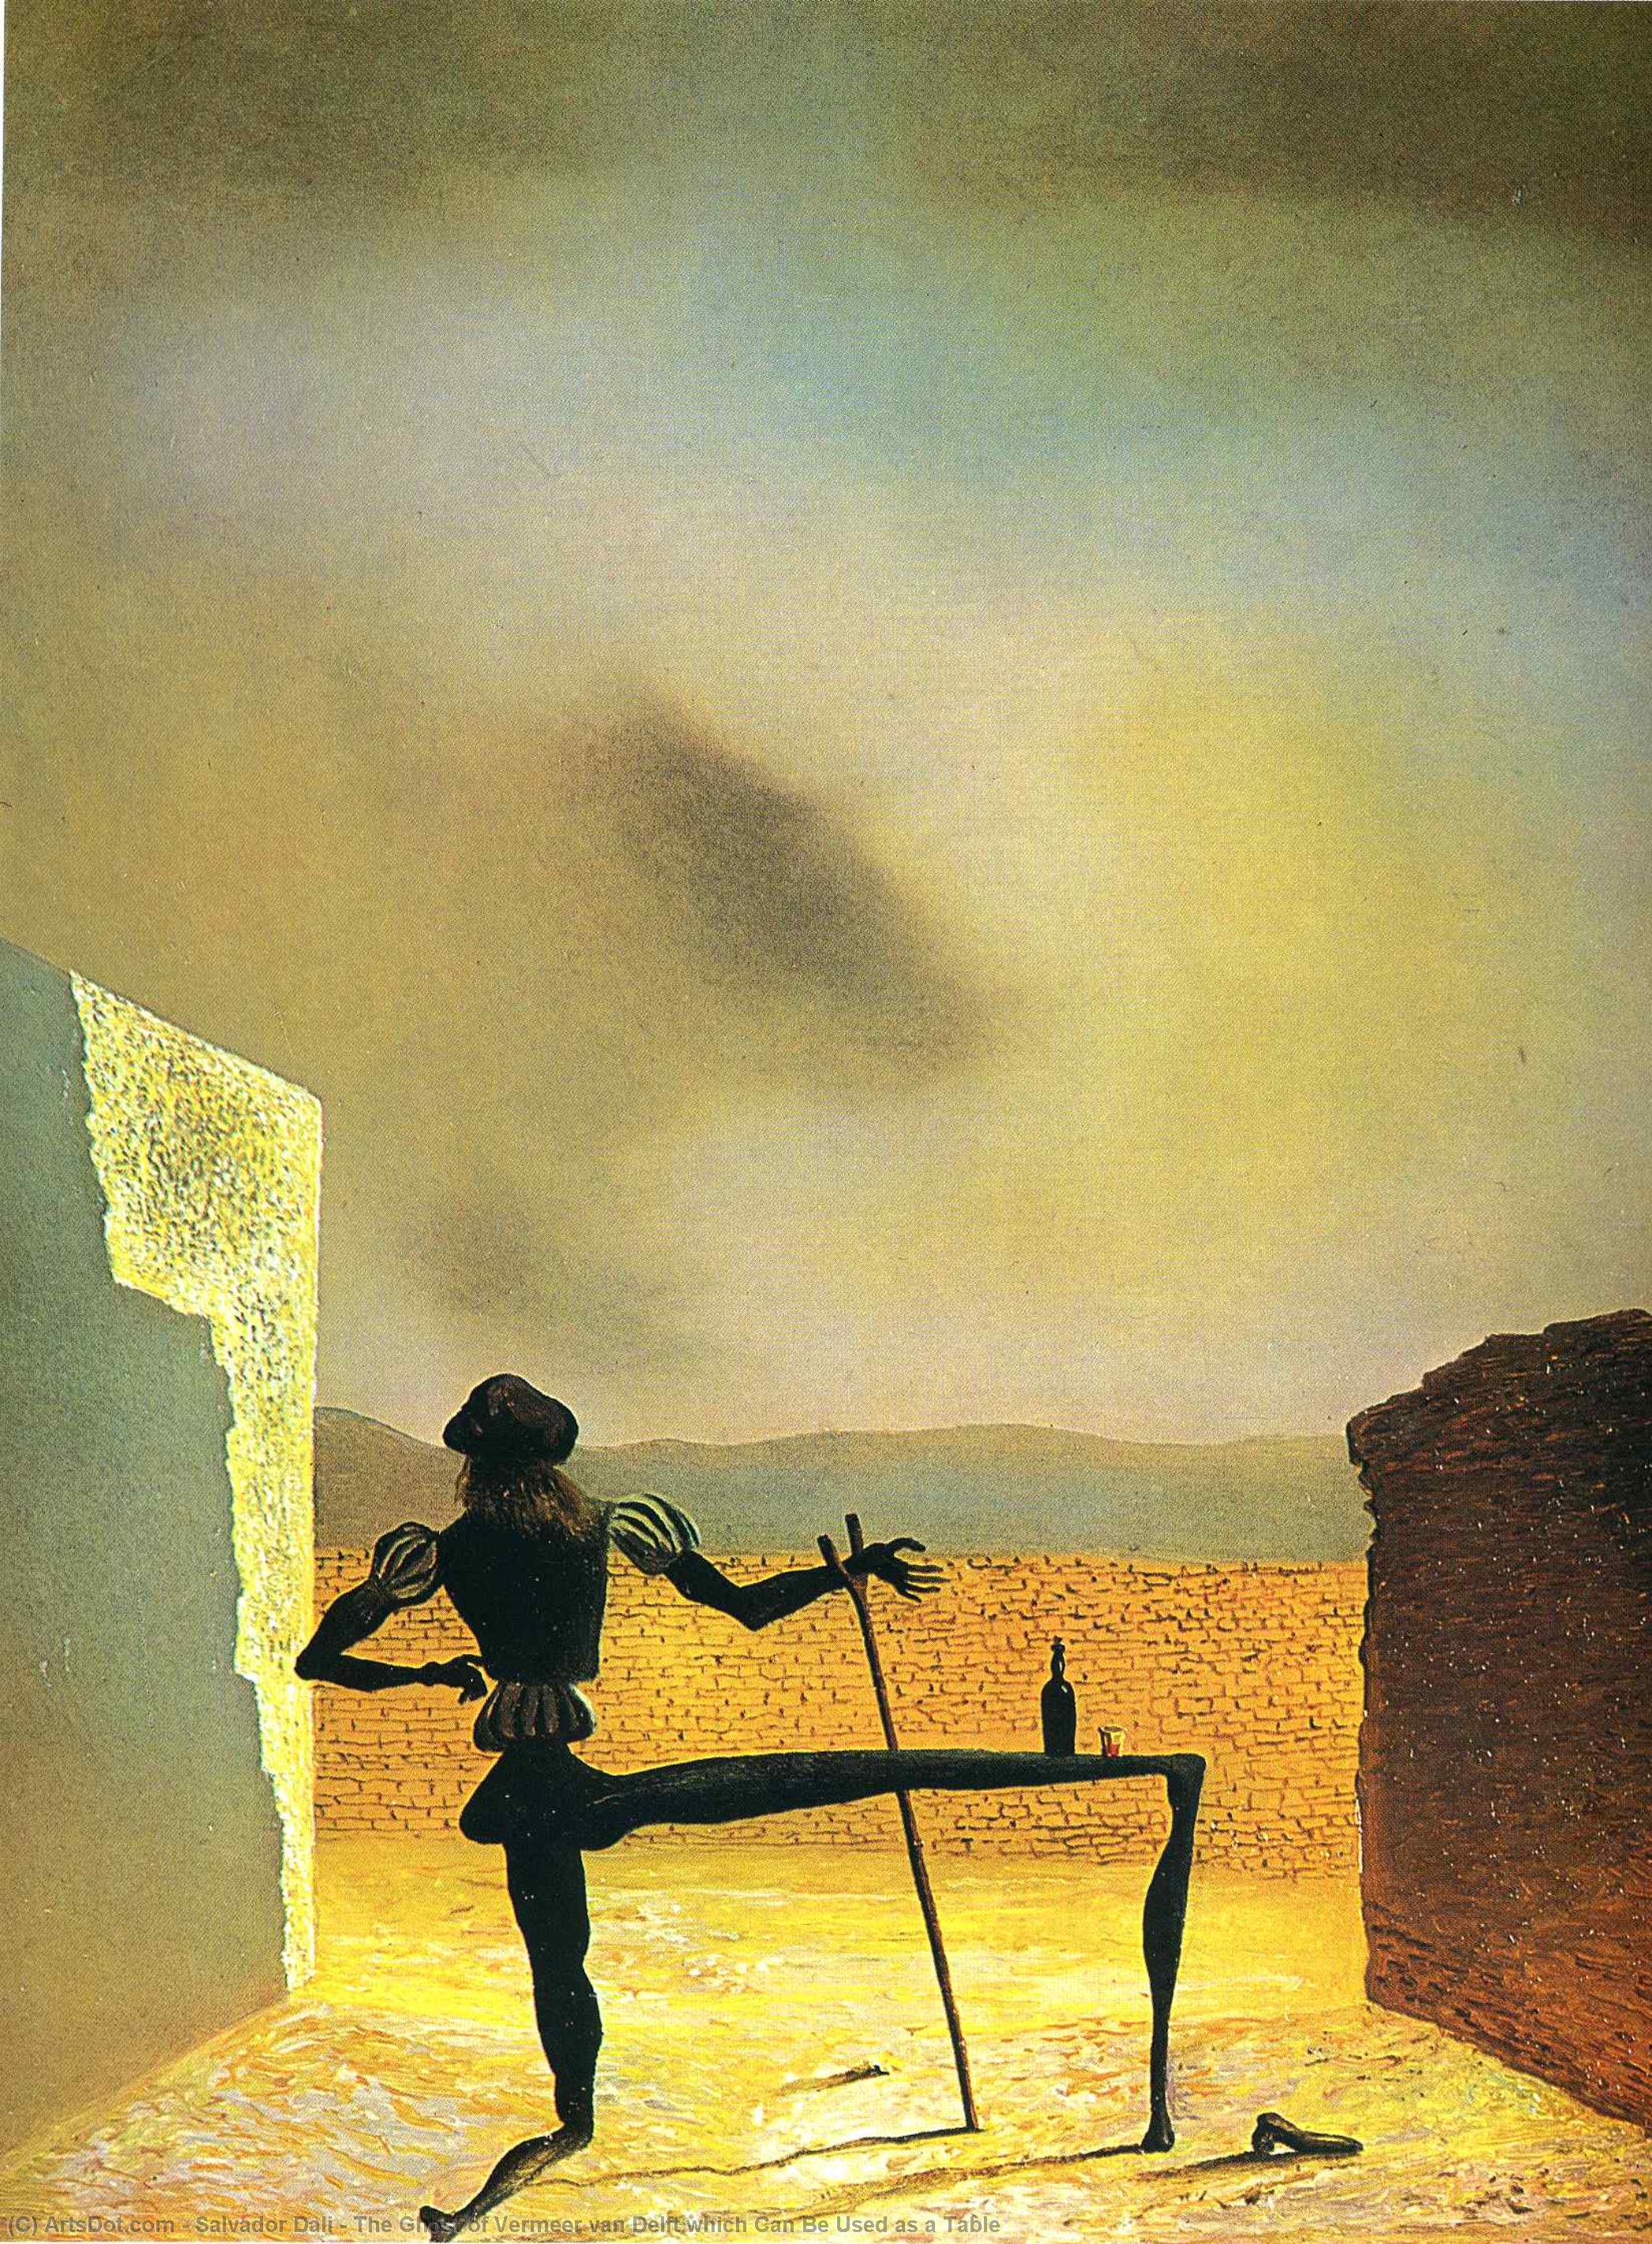 WikiOO.org - Encyclopedia of Fine Arts - Festés, Grafika Salvador Dali - The Ghost of Vermeer van Delft which Can Be Used as a Table